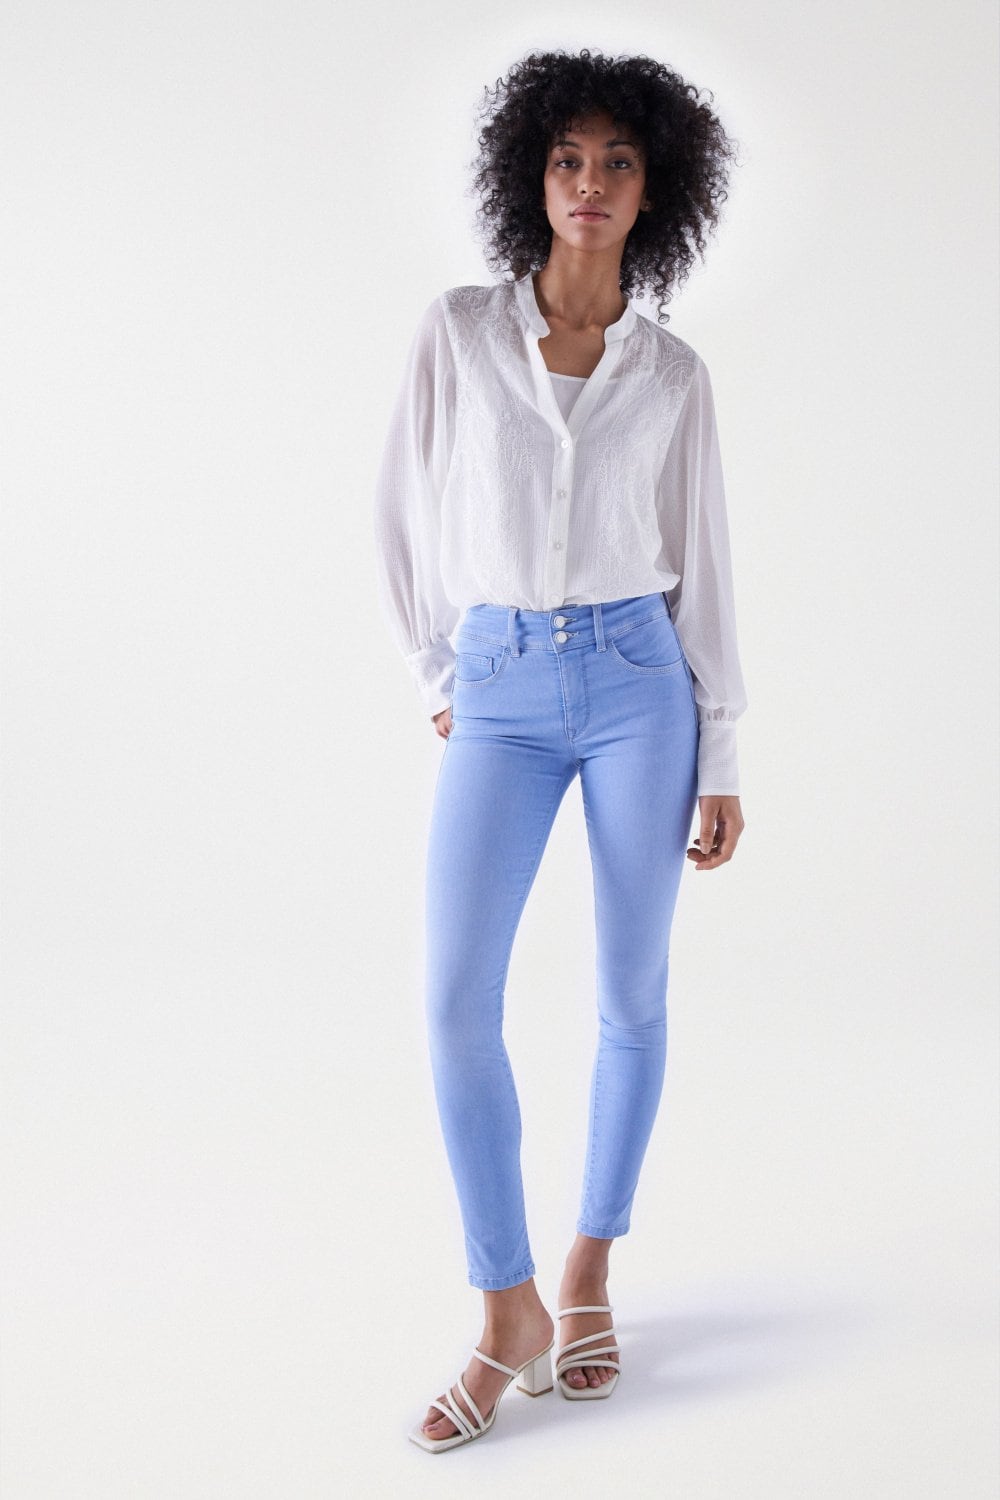 Secret With Embroidery Back in Ice Bleach Jeans Salsa Jeans   